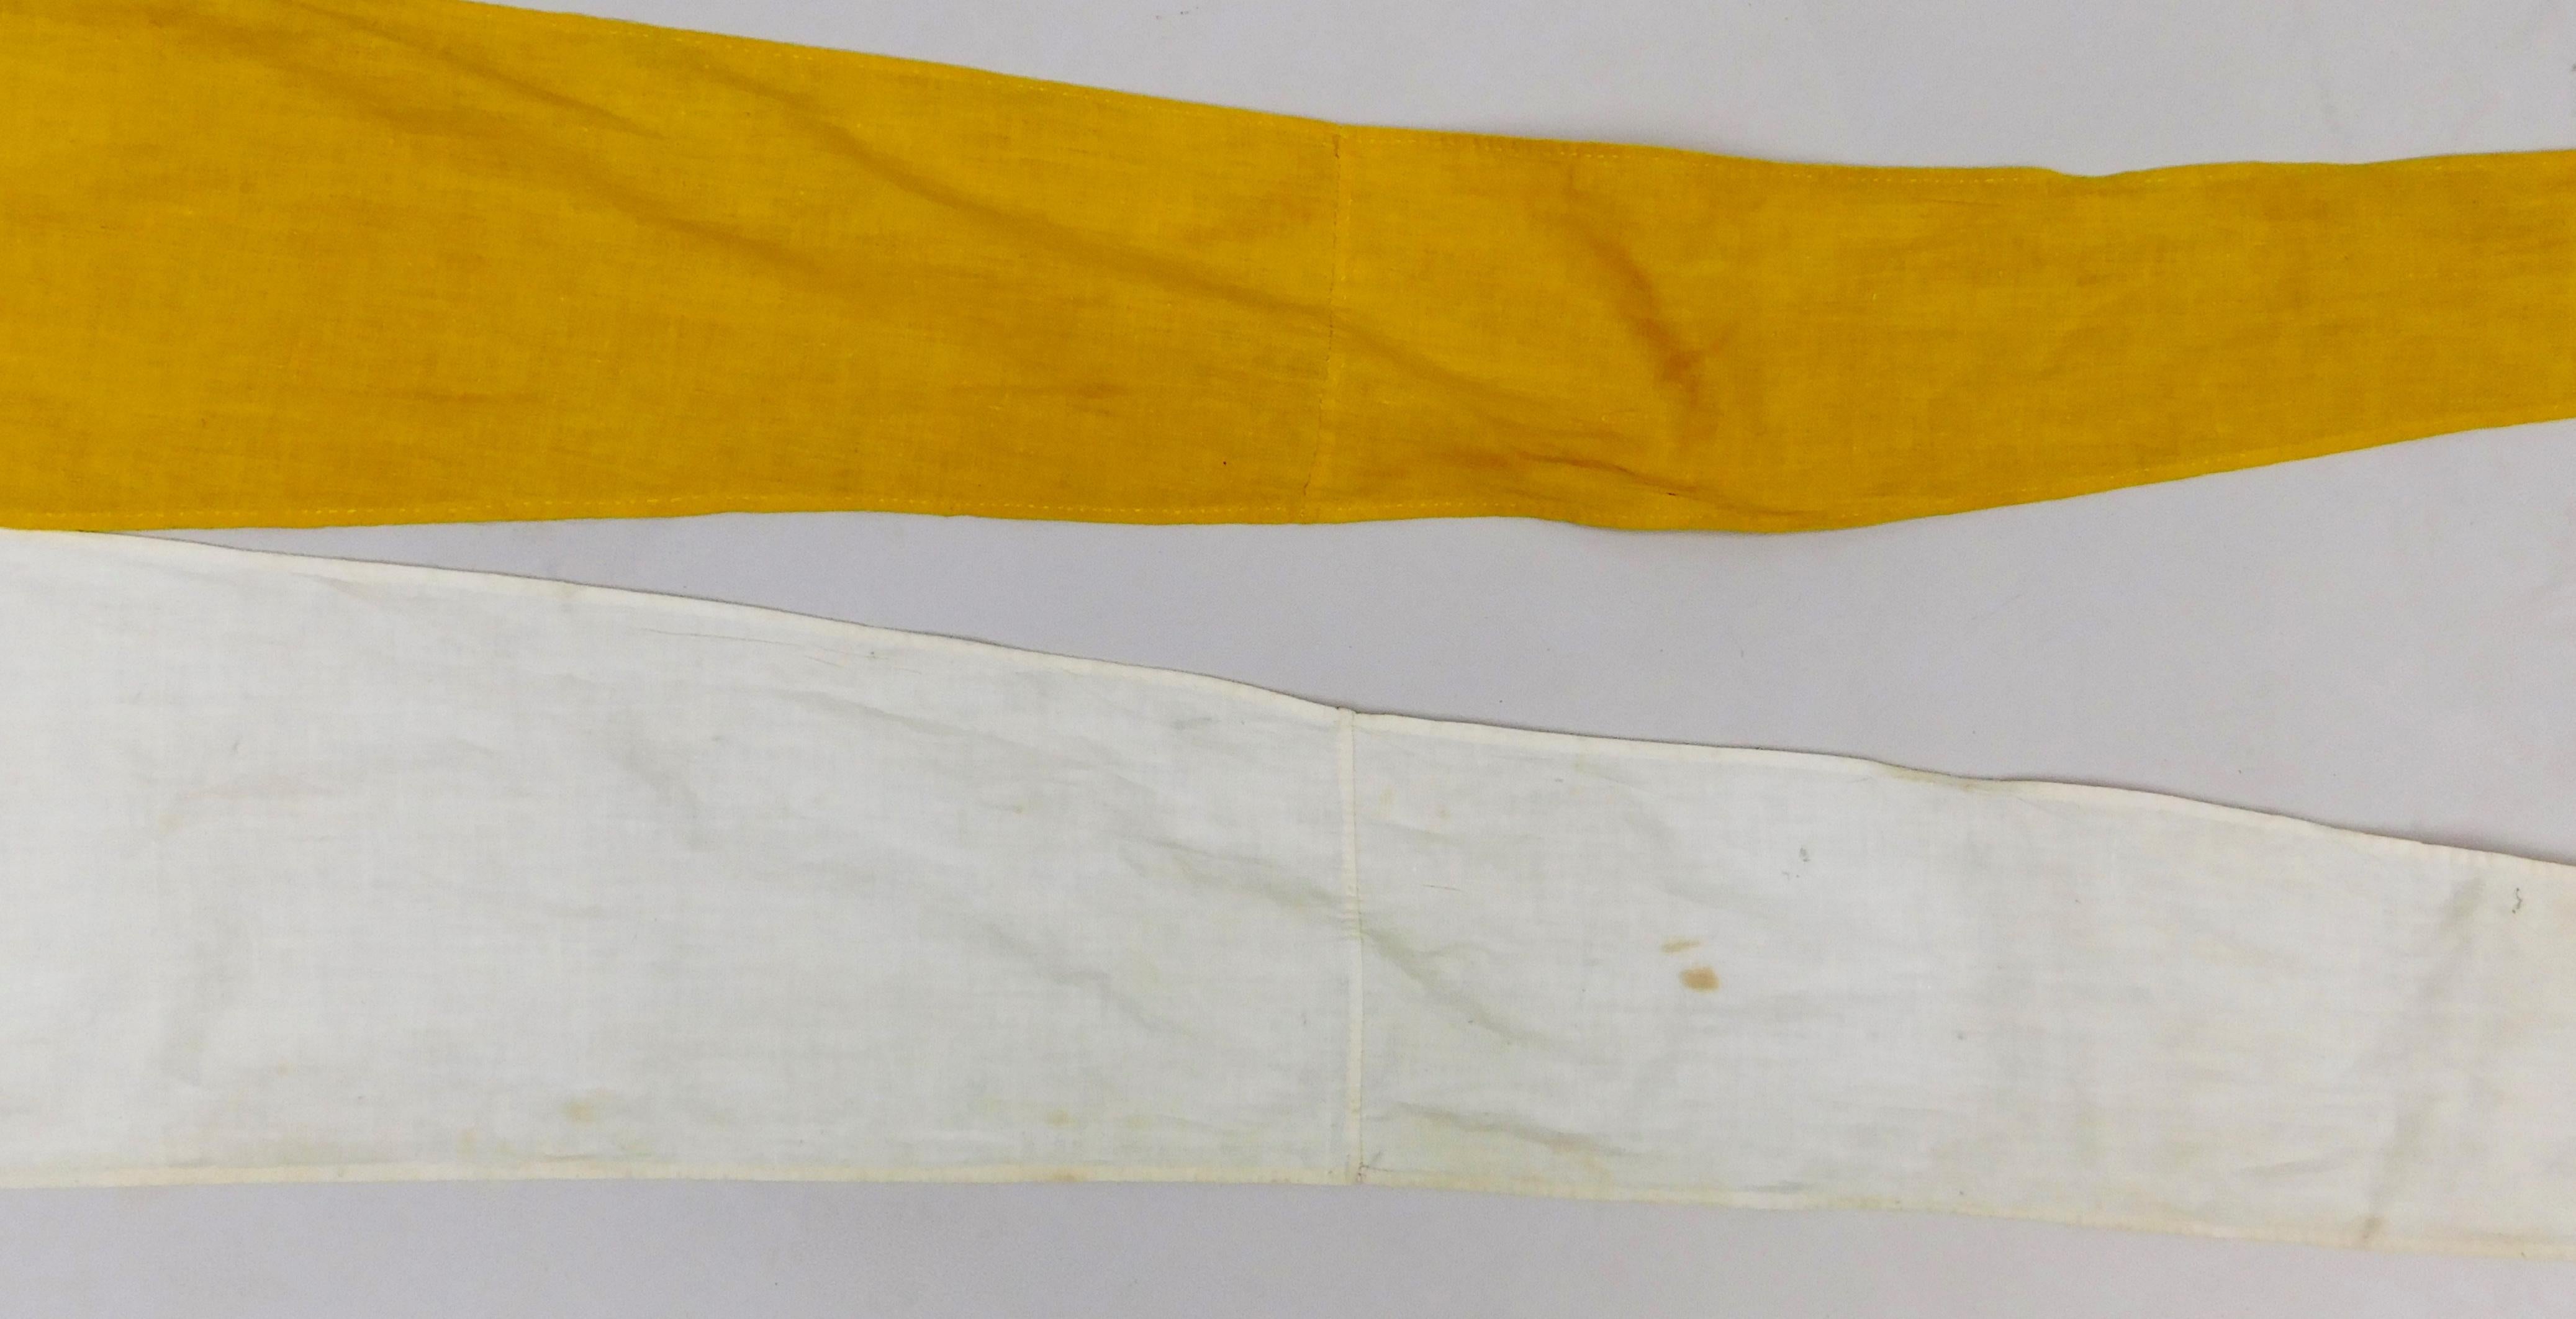 Vintage Belgian processional flag or banner, circa 1940. Measuring over 8 feet long this flag would be sensational hanging from a staircase or alone horizontally on a wall adding a perfect touch of colour and texture.
